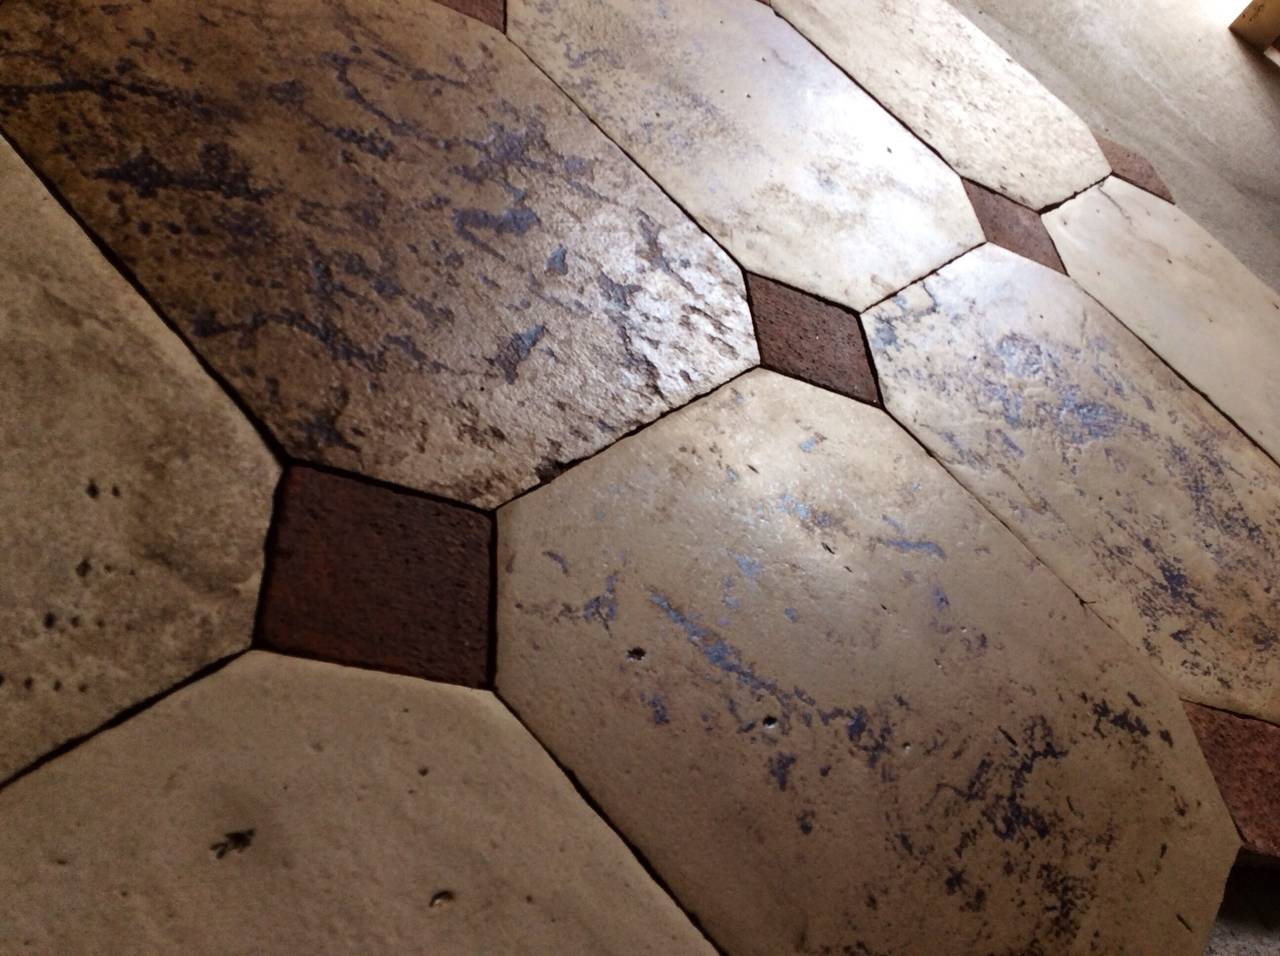 Antique Reclaimed  Recycled  French Cabochon, Stone and Terracotra Flooring 19th Century,  we have reduced  to 1 inch  thick, ( 2,5 cm ) size 15,7 
Stock  available circa. 320  sqft,

discounted price $ 20,000

For more information send